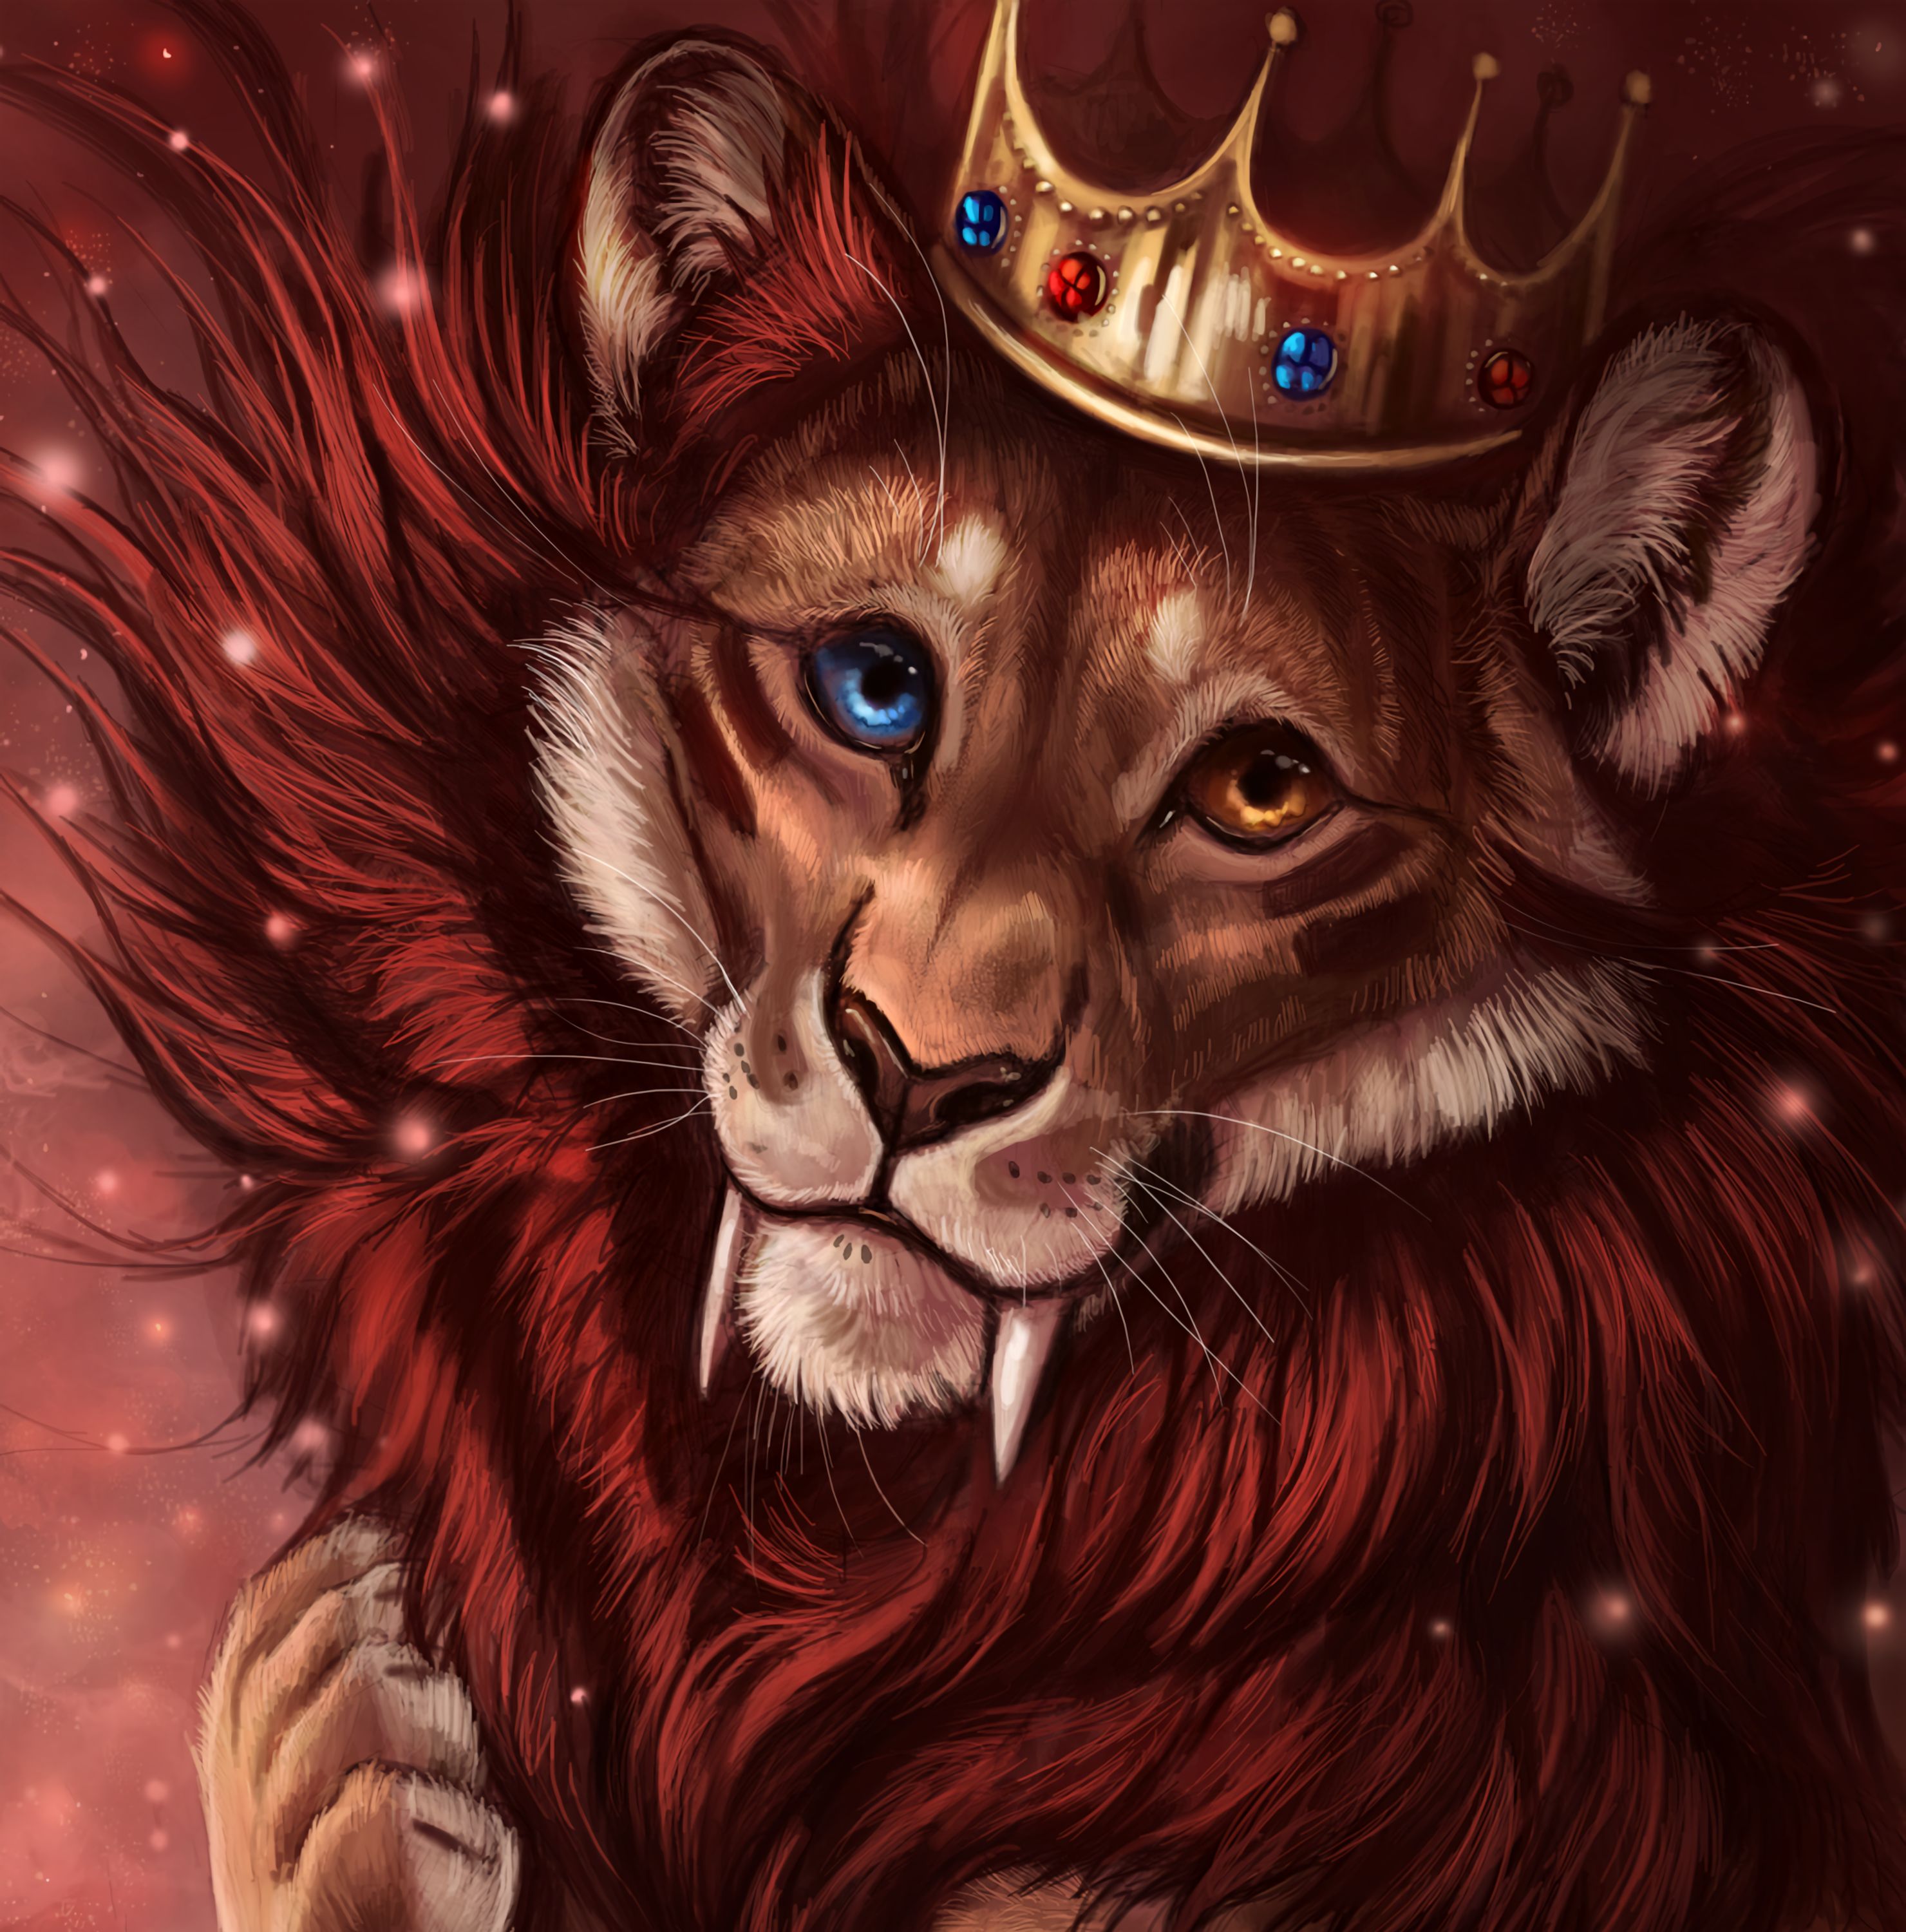 king of beasts, art, king, king of the beasts, crown, lion, tsar